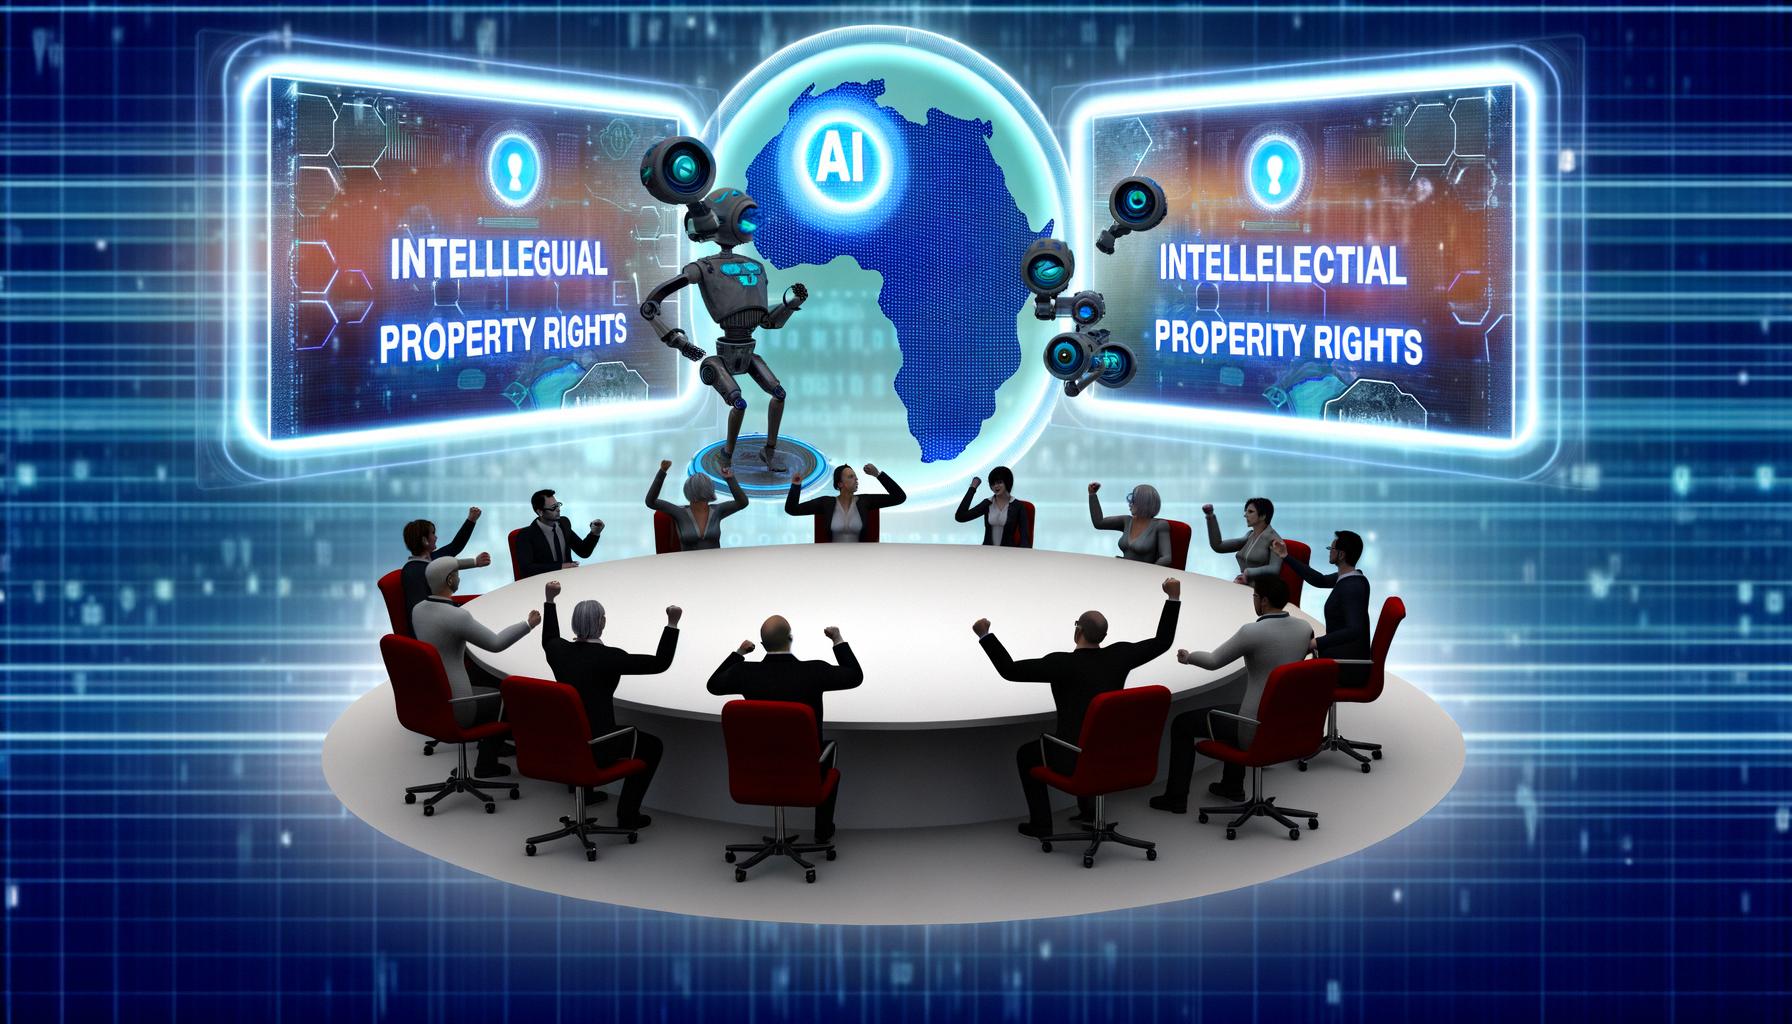 IP rights' importance highlighted amidst AI and tech industry advances.